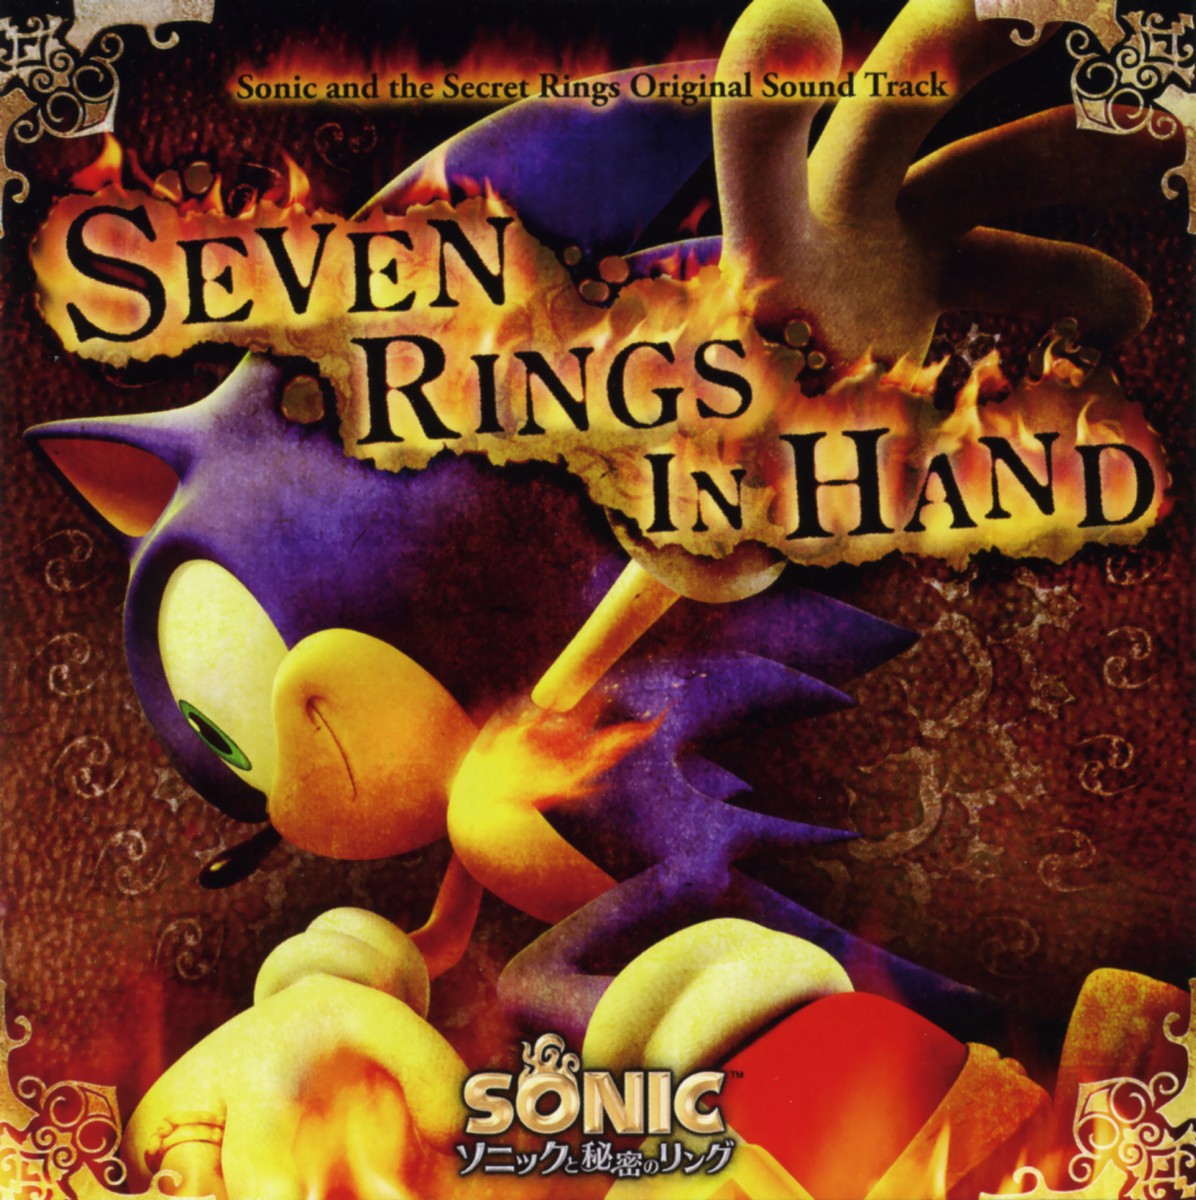 Sonic and the Secret Rings - Darkspine Sonic vs Alf Layla wa-Layla & Ending  